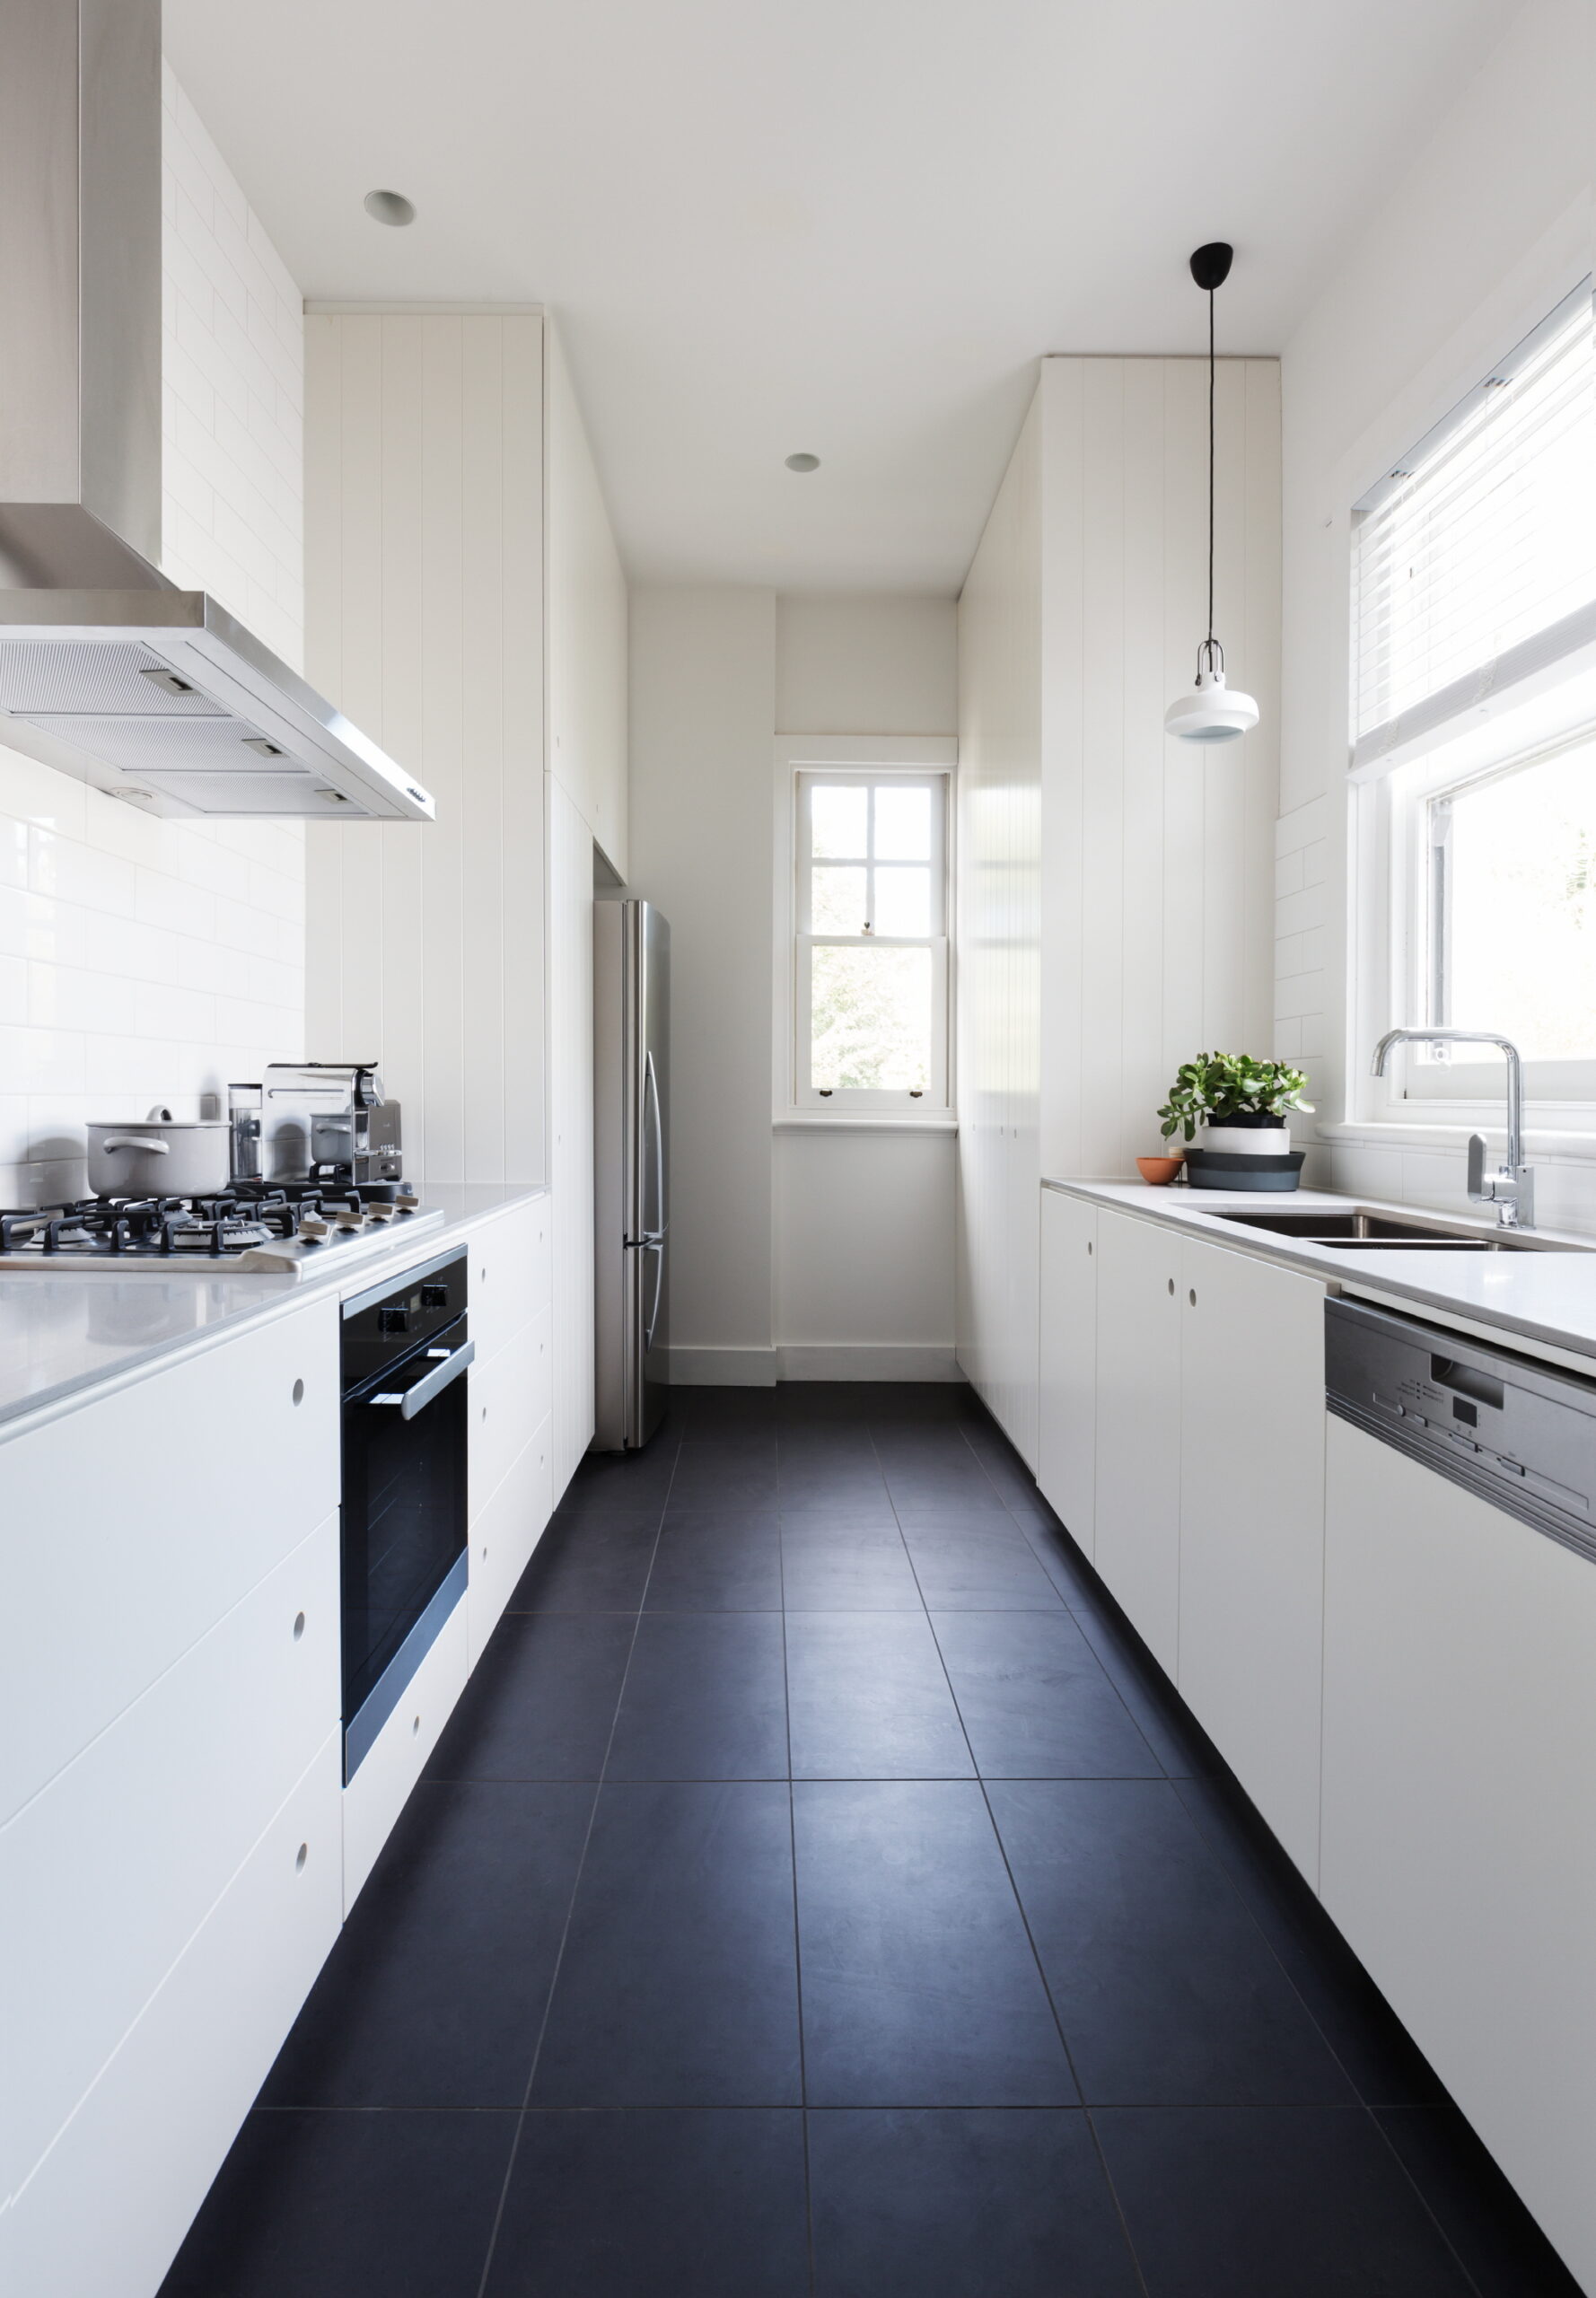 Opt for a timeless black and white kitchen with a large tile floor to evoke a classic and historic ambiance.